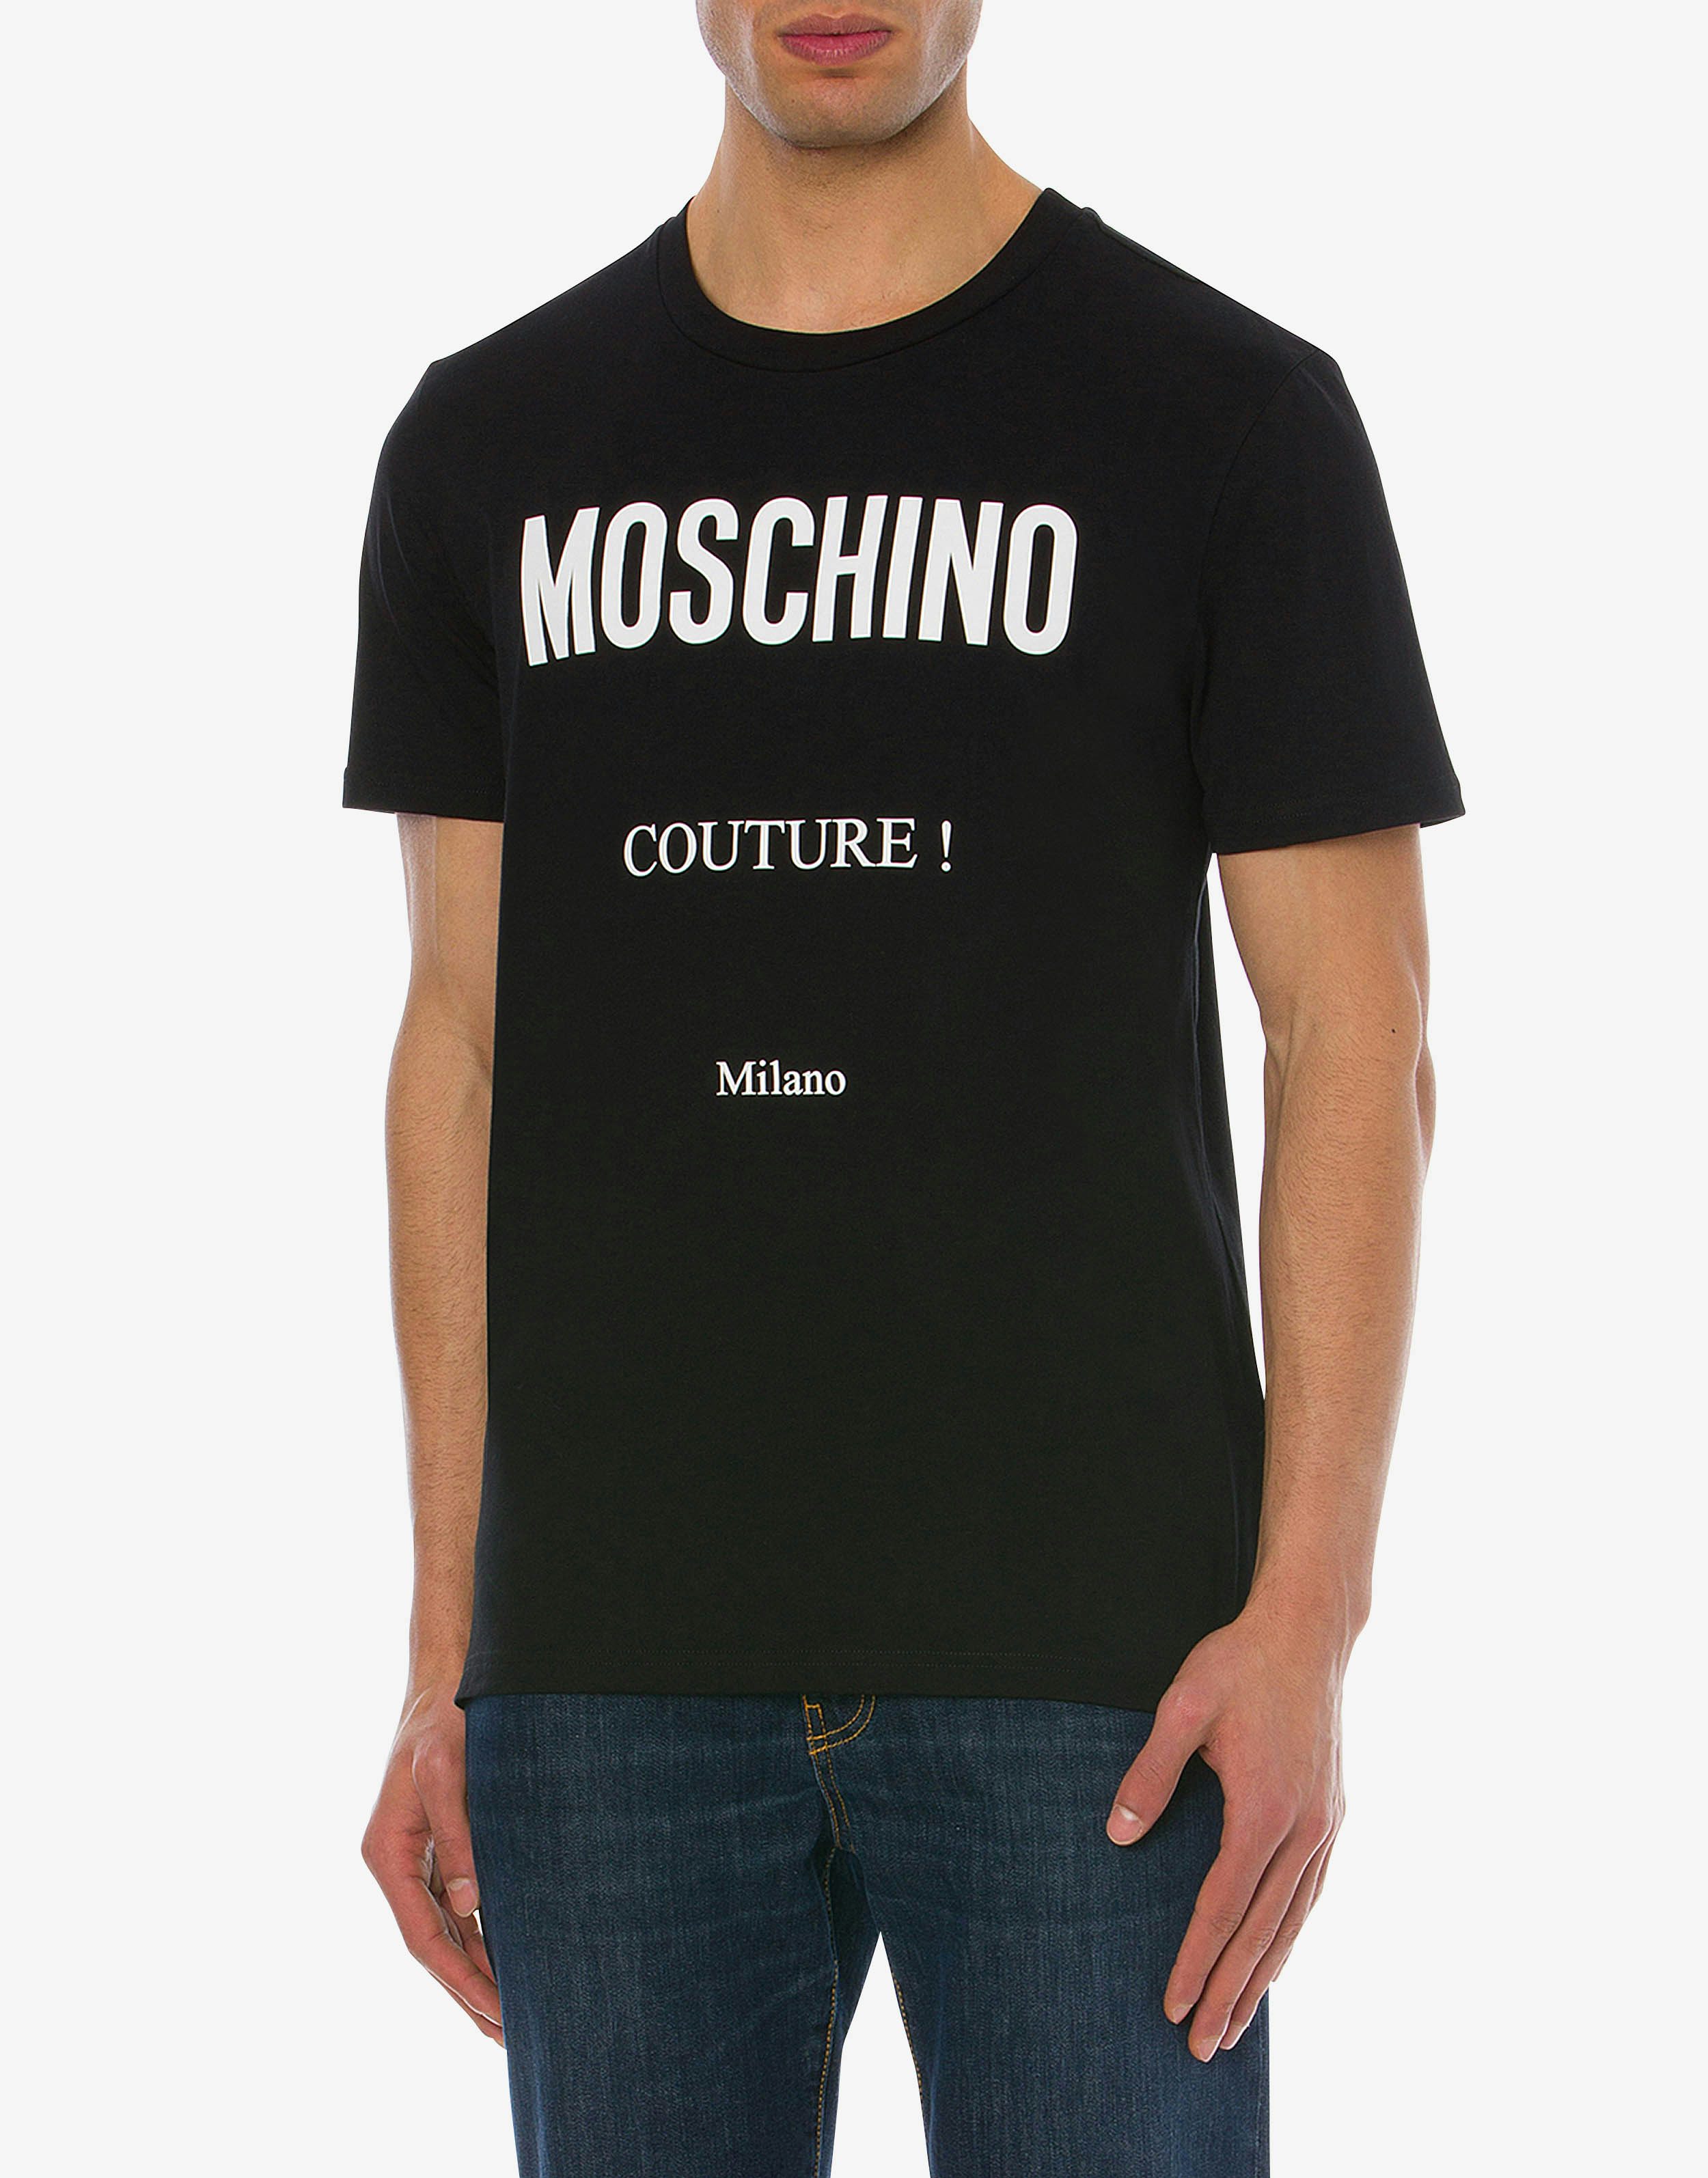 Jersey t-shirt Moschino Couture 0